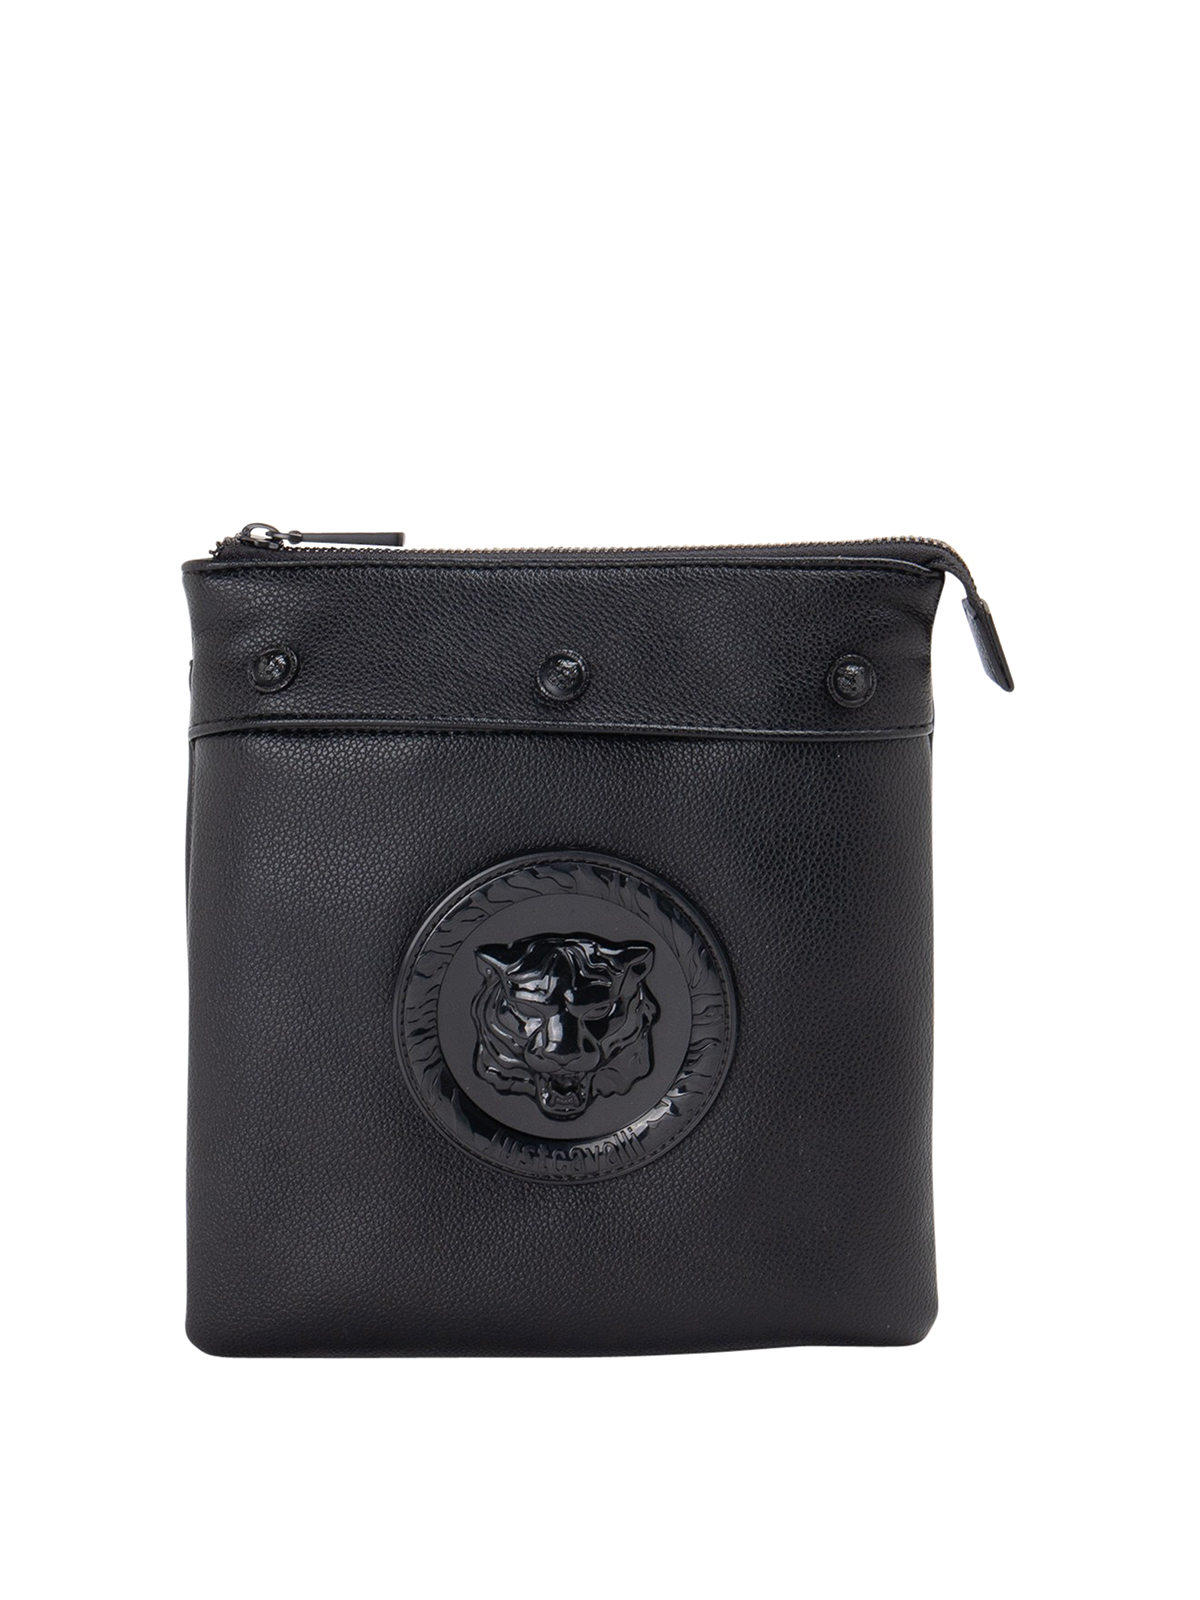 Just Cavalli Leather Tiger Logo Black Side Bag - Accessories from N22  Menswear UK